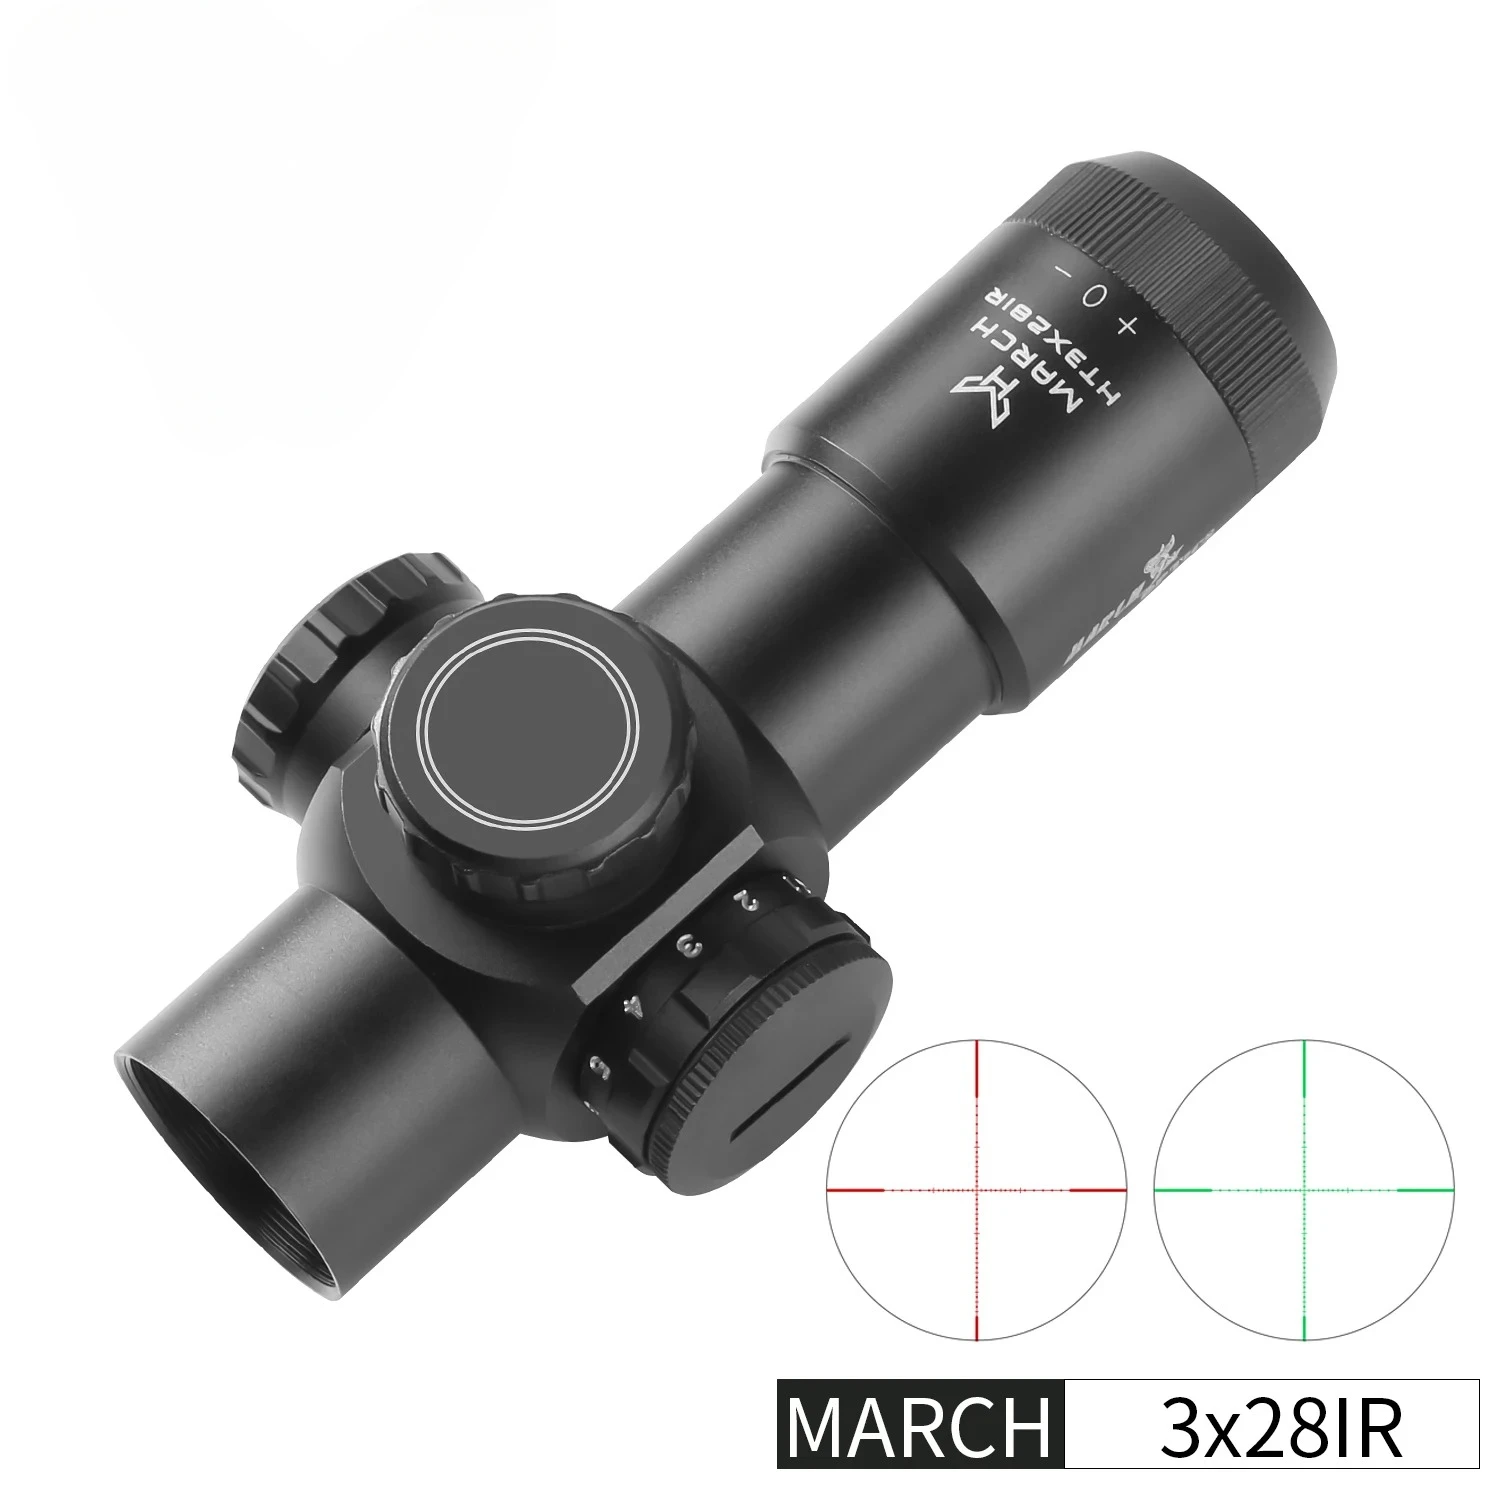 

March H3x28IR Fixed Optic Short Riflescope Sight Green Red Rifle Scope for Hunting Sniper Airsoft Air Guns Red Dot With Mounts